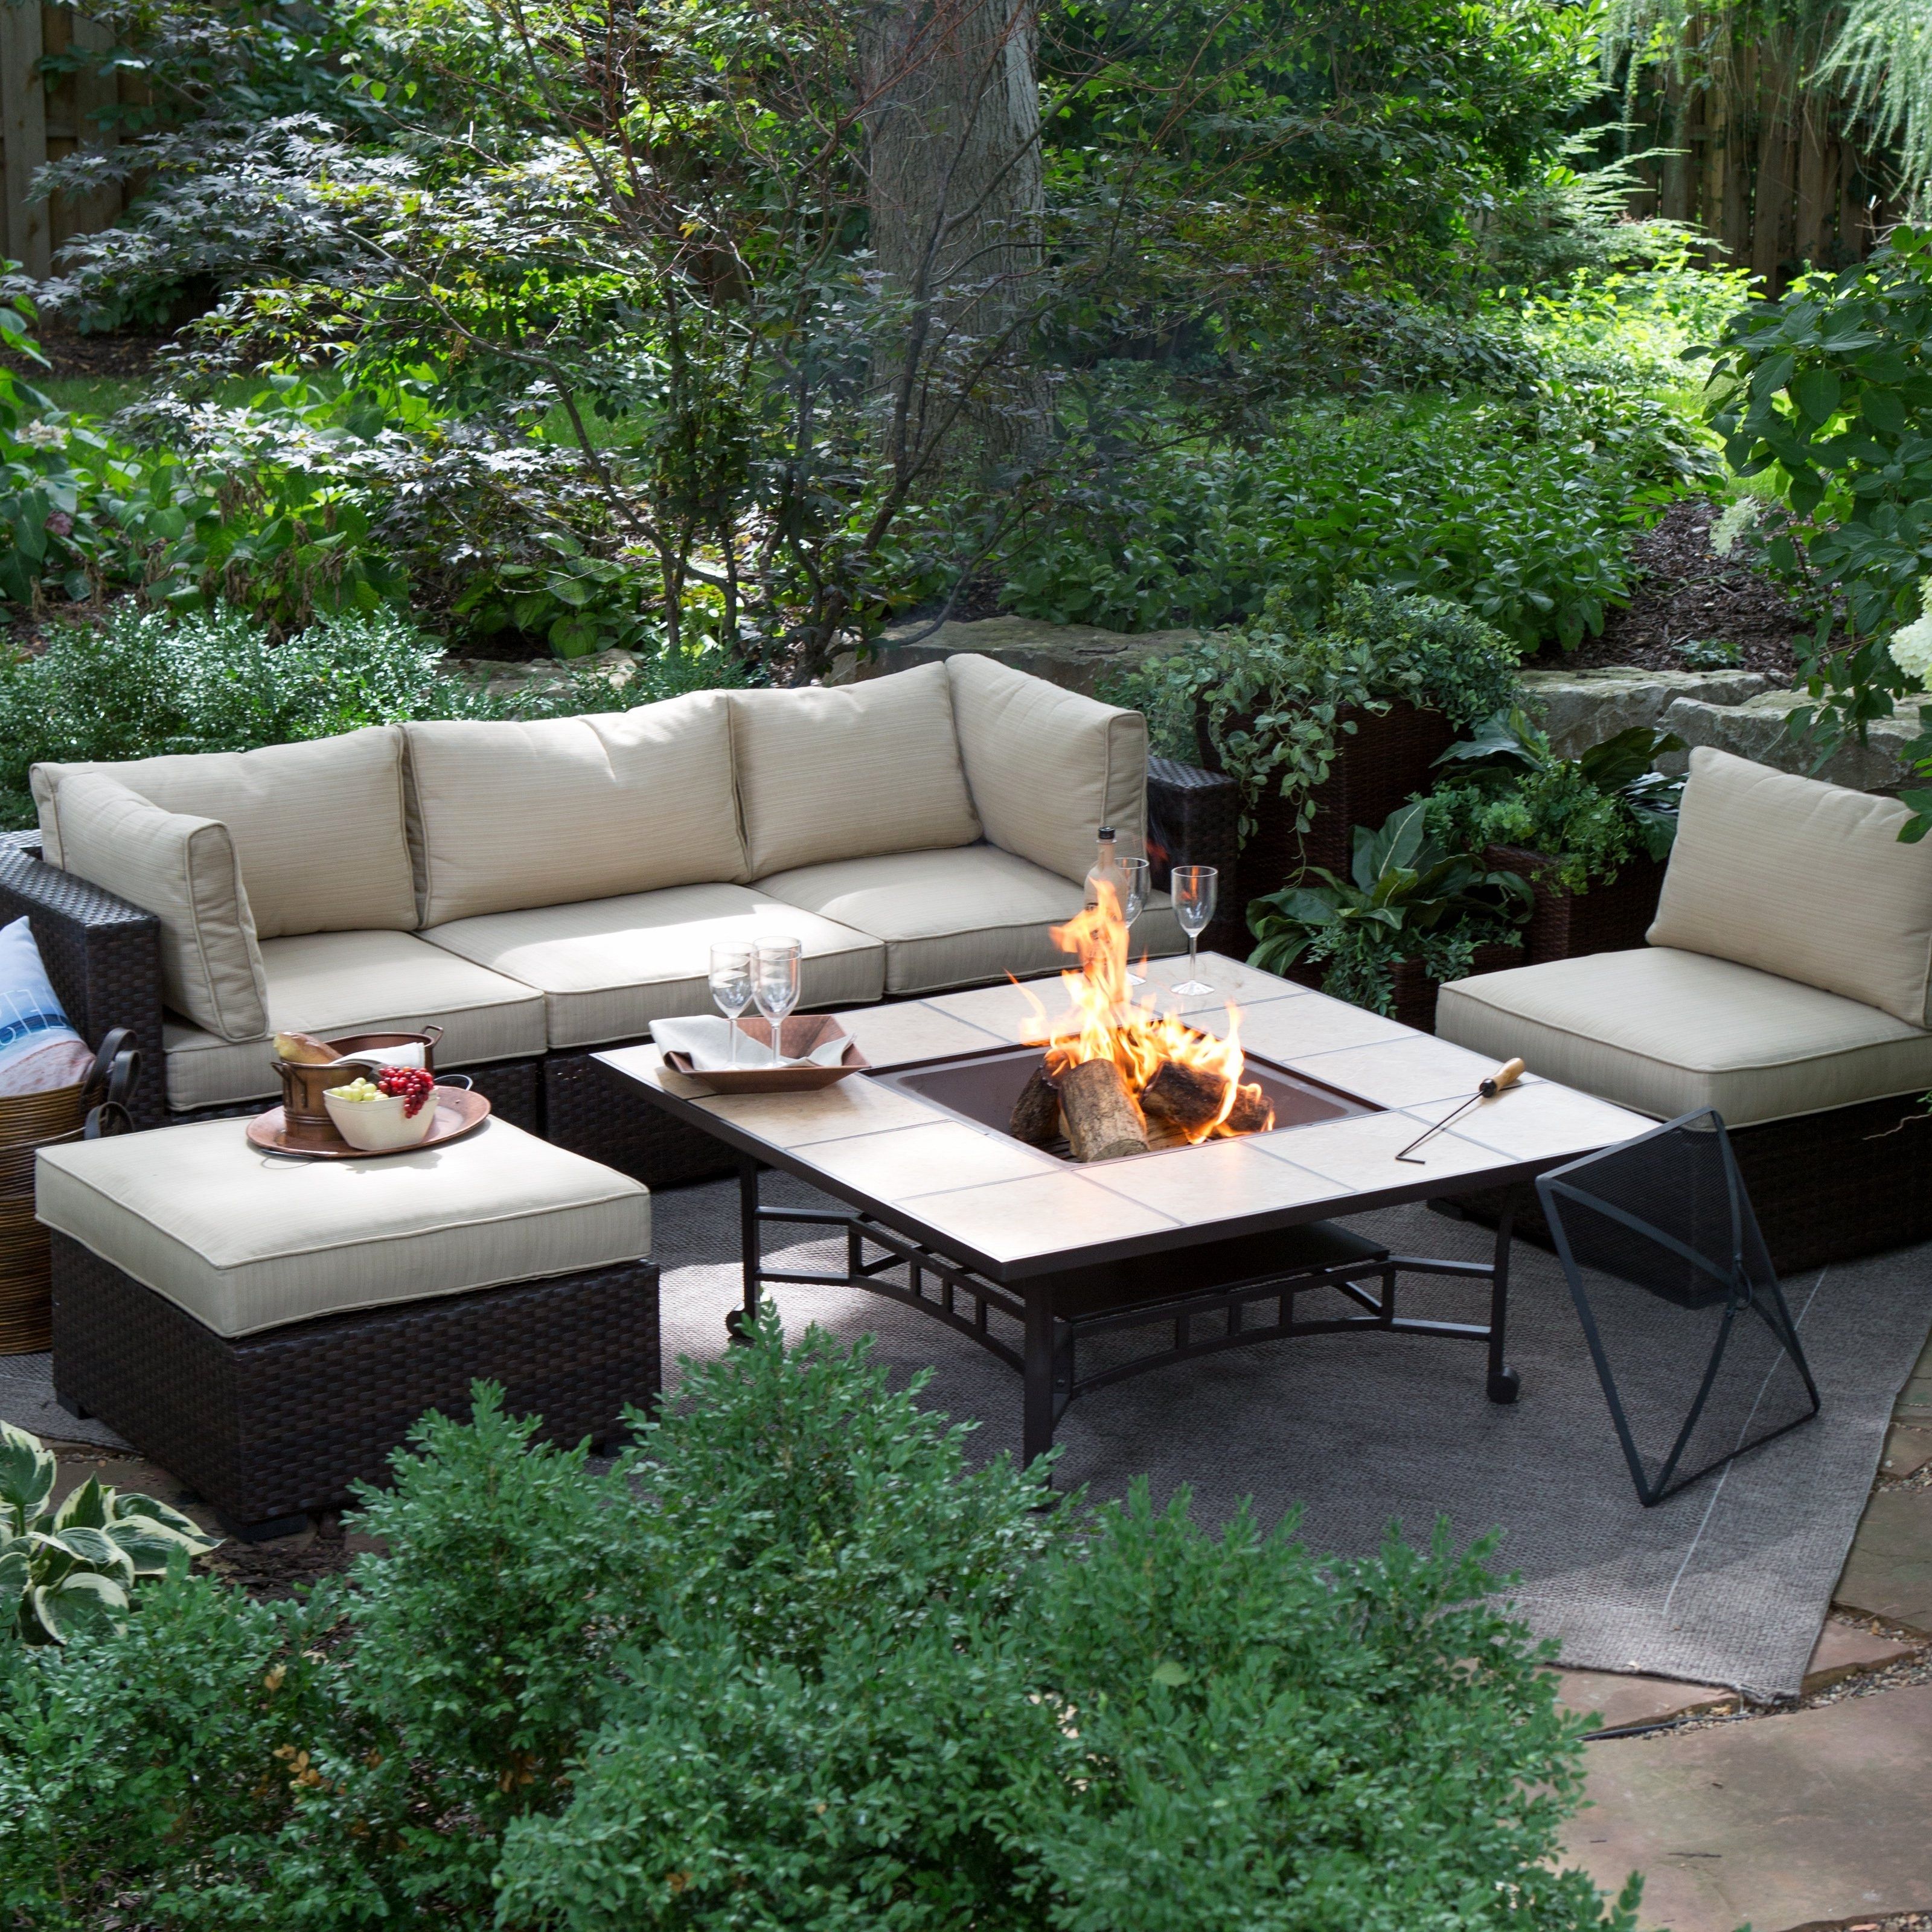 Patio Conversation Sets With Fire Table With Famous Patio Conversation Sets With Fire Pit Lovely Conversation Sets Fire (View 14 of 20)